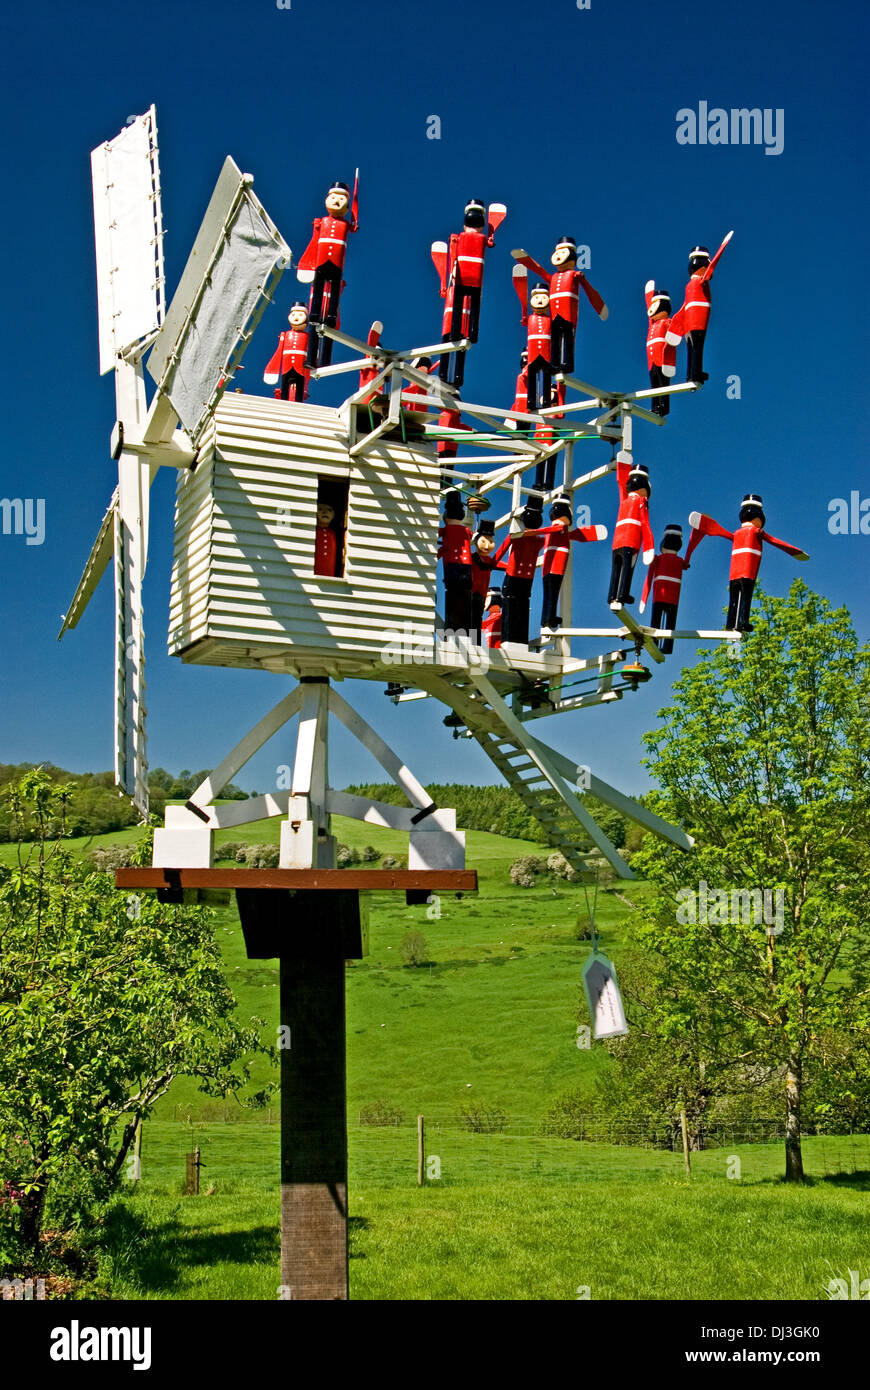 Unique timber weather vane in the shape of a windmill, with toy soldiers in red uniforms acting as a counter balance. Stock Photo